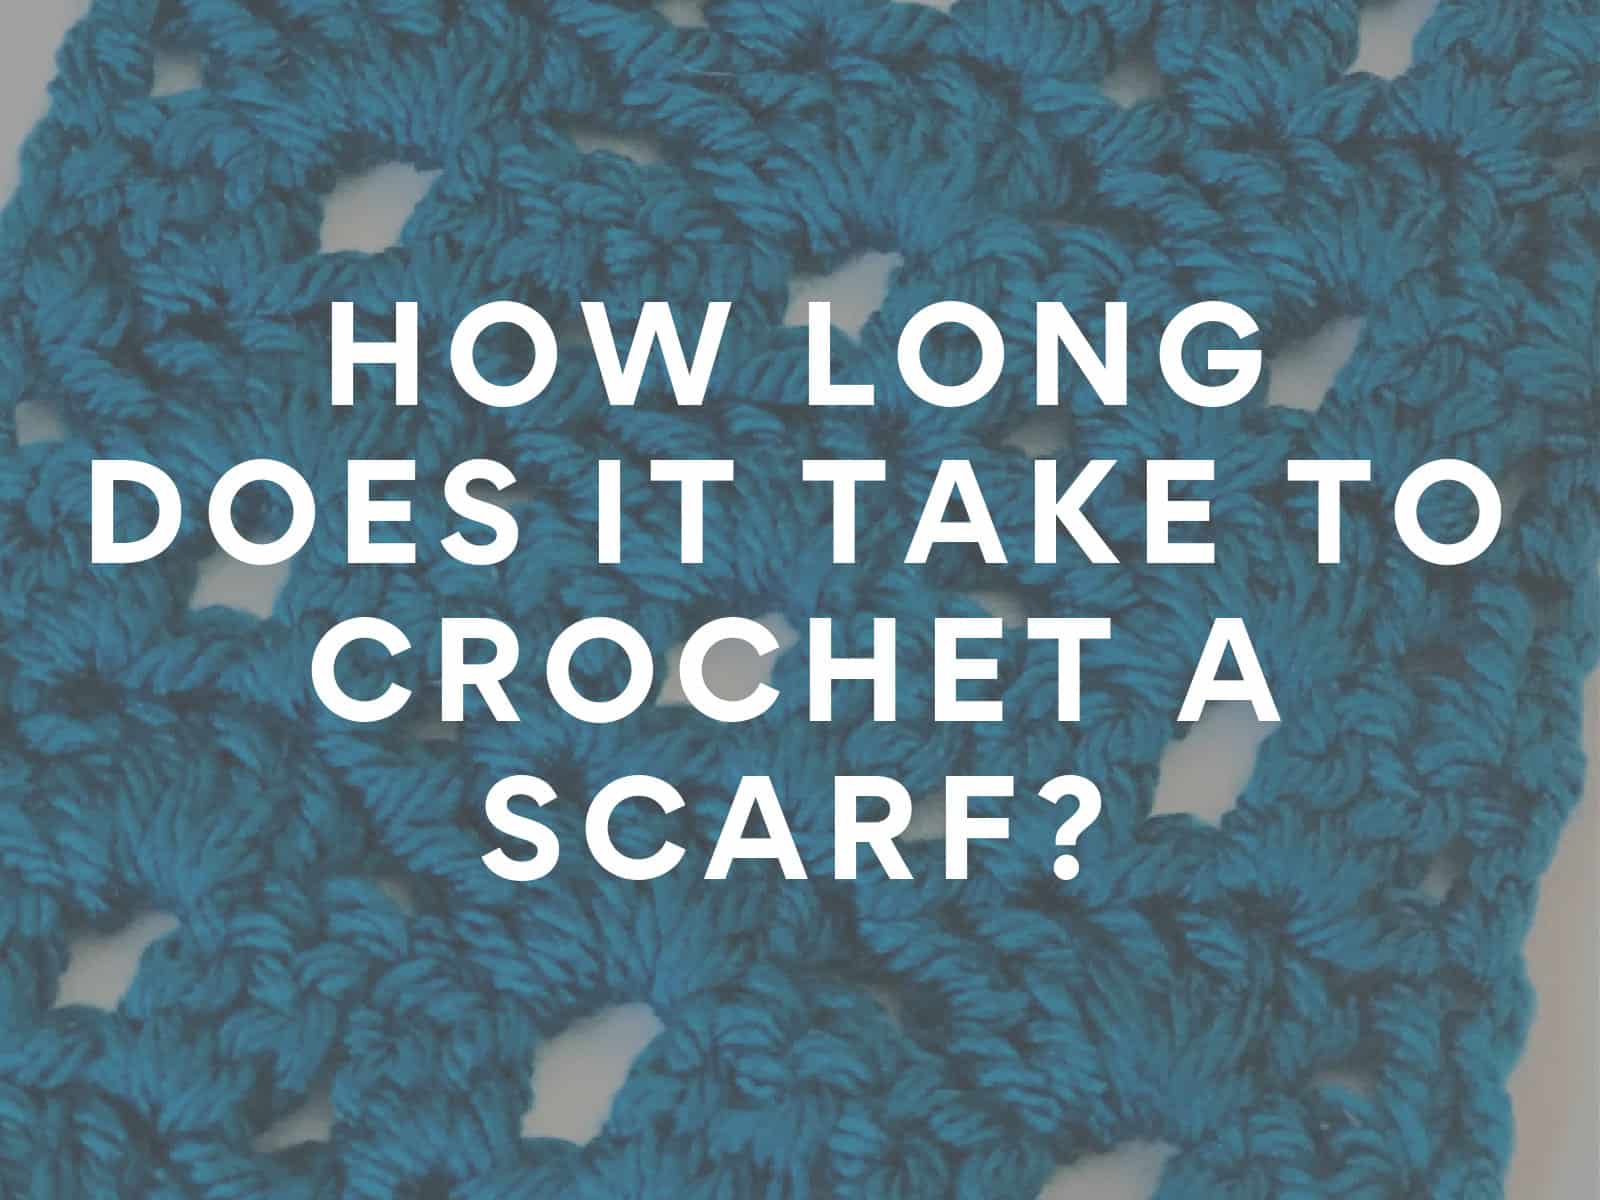 How Long Does It Take to Crochet a Scarf?